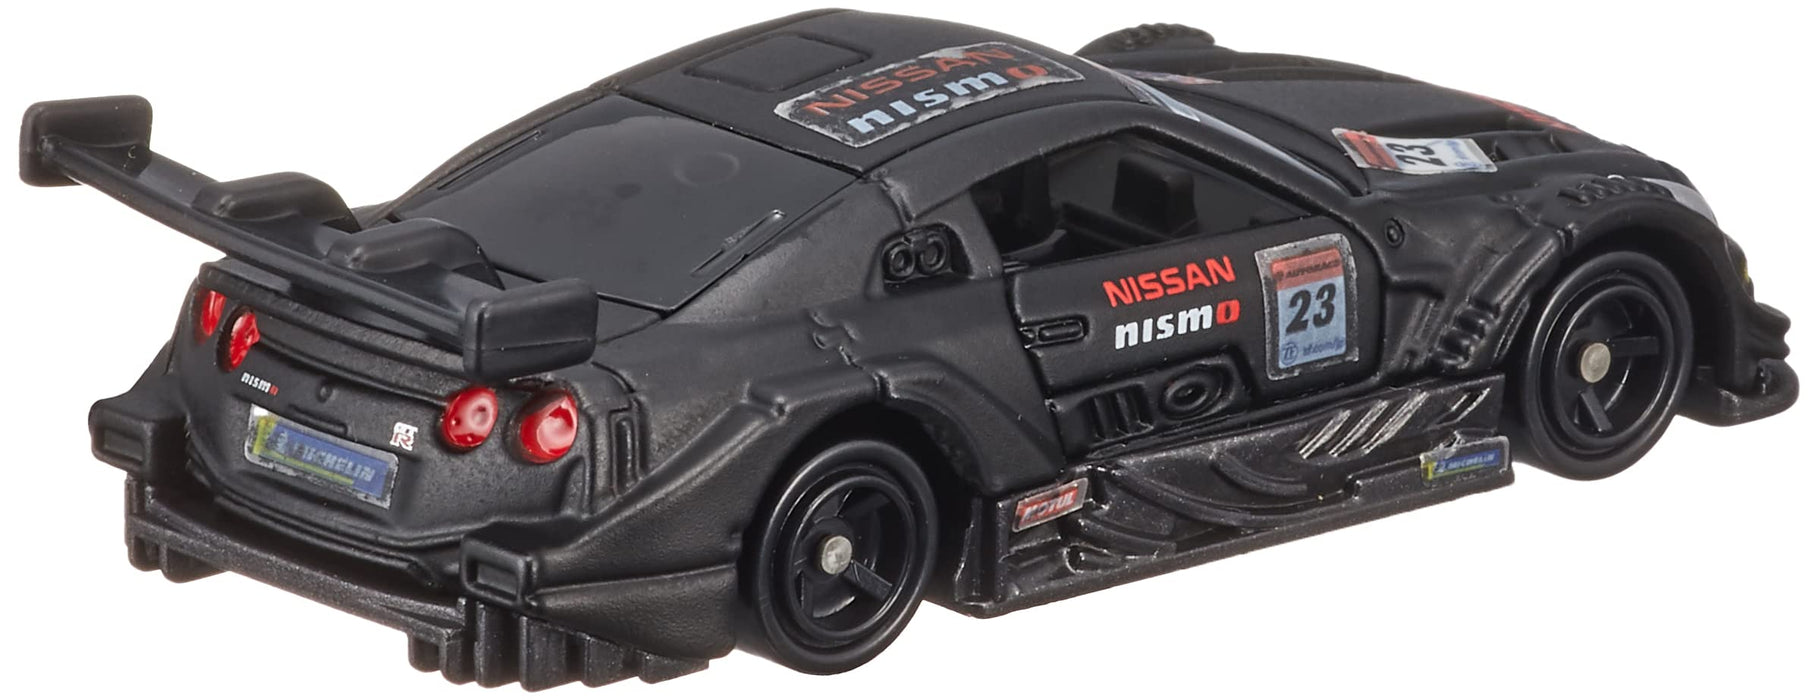 Takara Tomy Nissan GT-R Nismo GT500 Mini Car Toy Tomica No.13 Suitable for Ages 3+